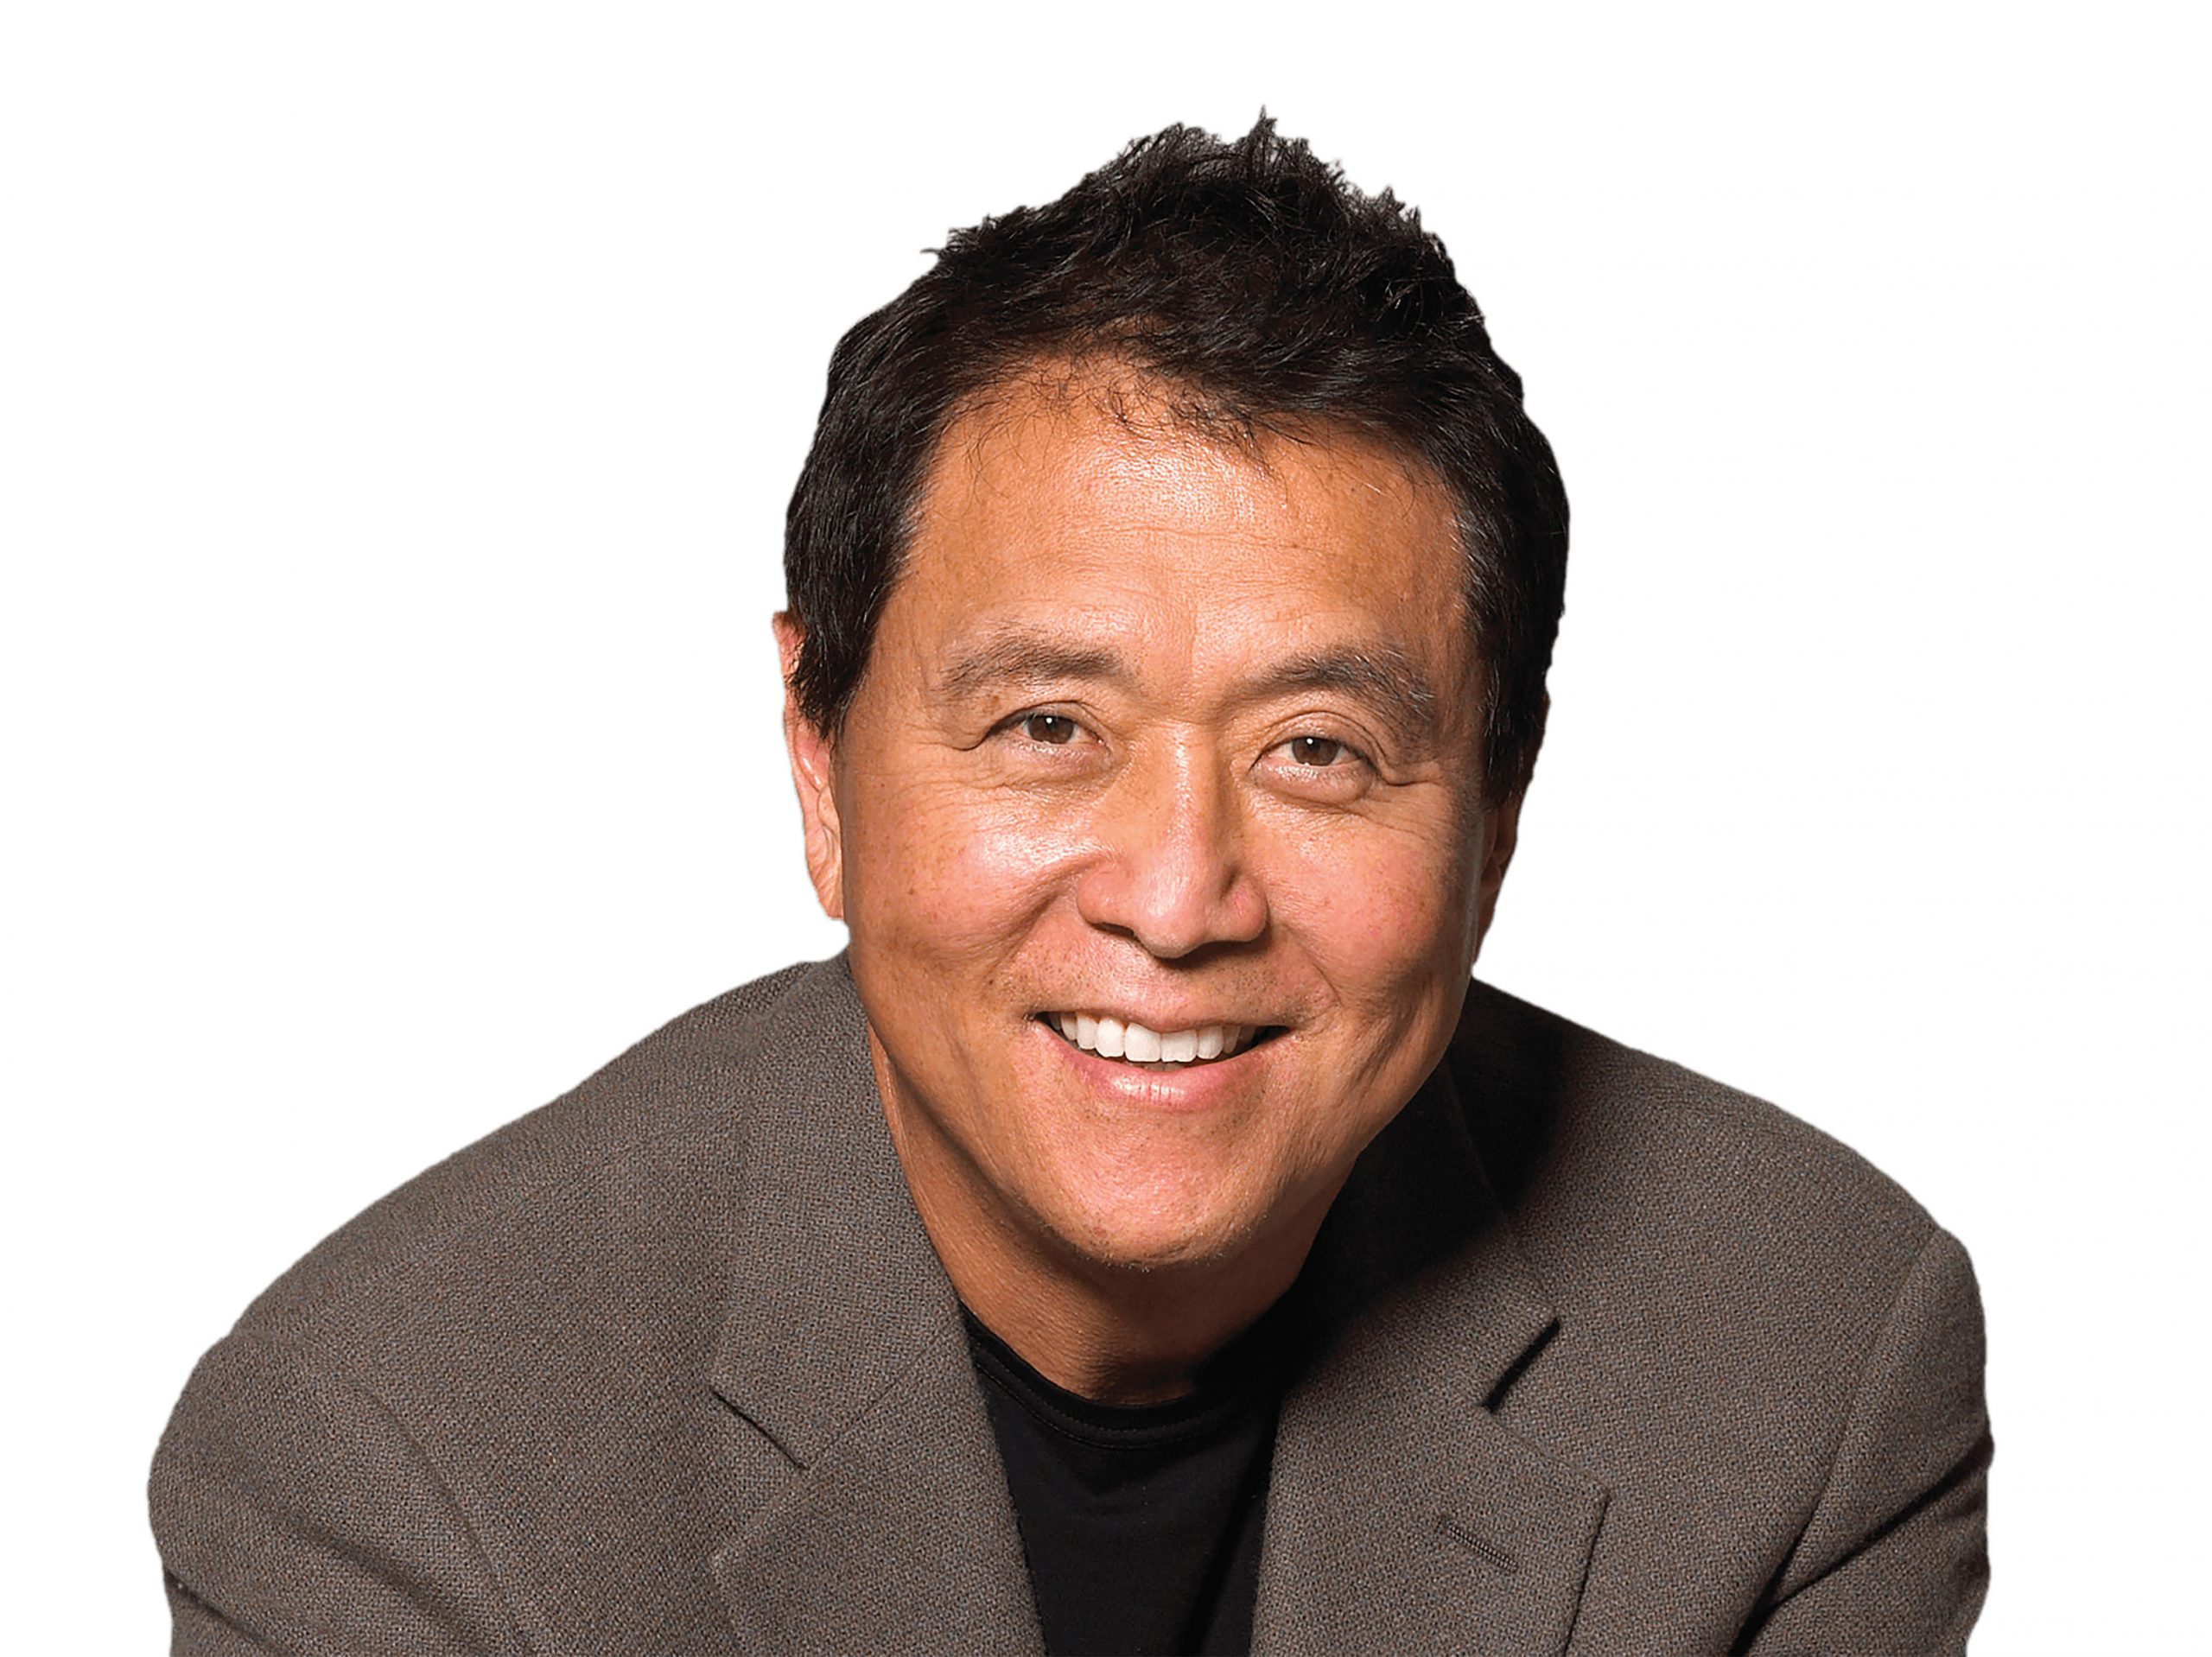 Author of “Rich Dad, Poor Dad” Robert Kiyosaki talks Flunking High School, Couldn’t Write and more with Vladtv